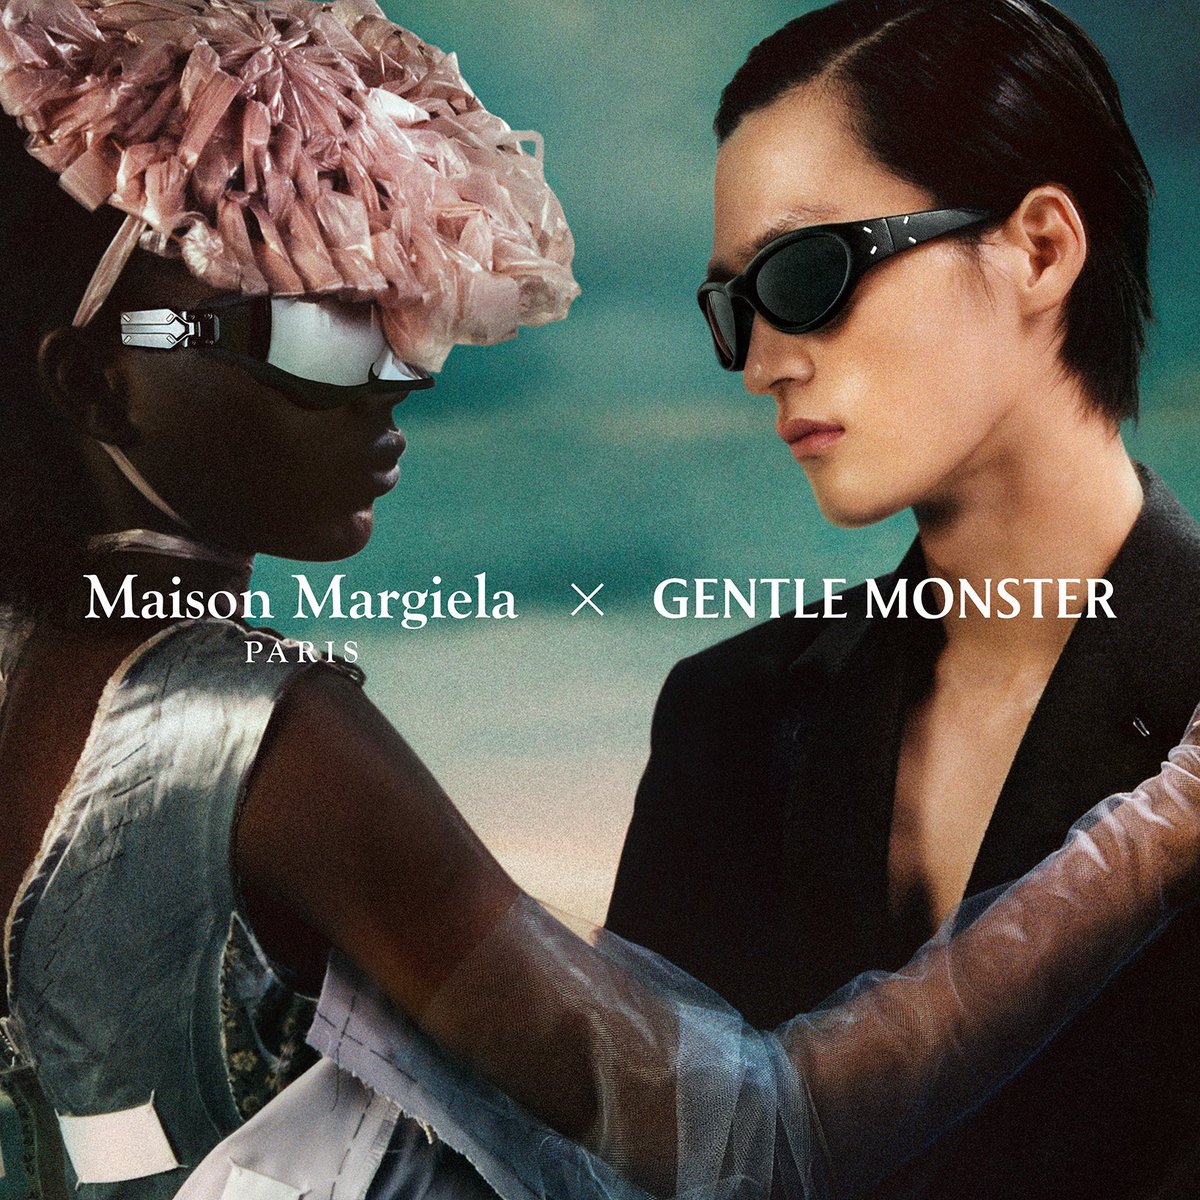 Maison Margiela × Gentle Monster Second Chapter March 7th